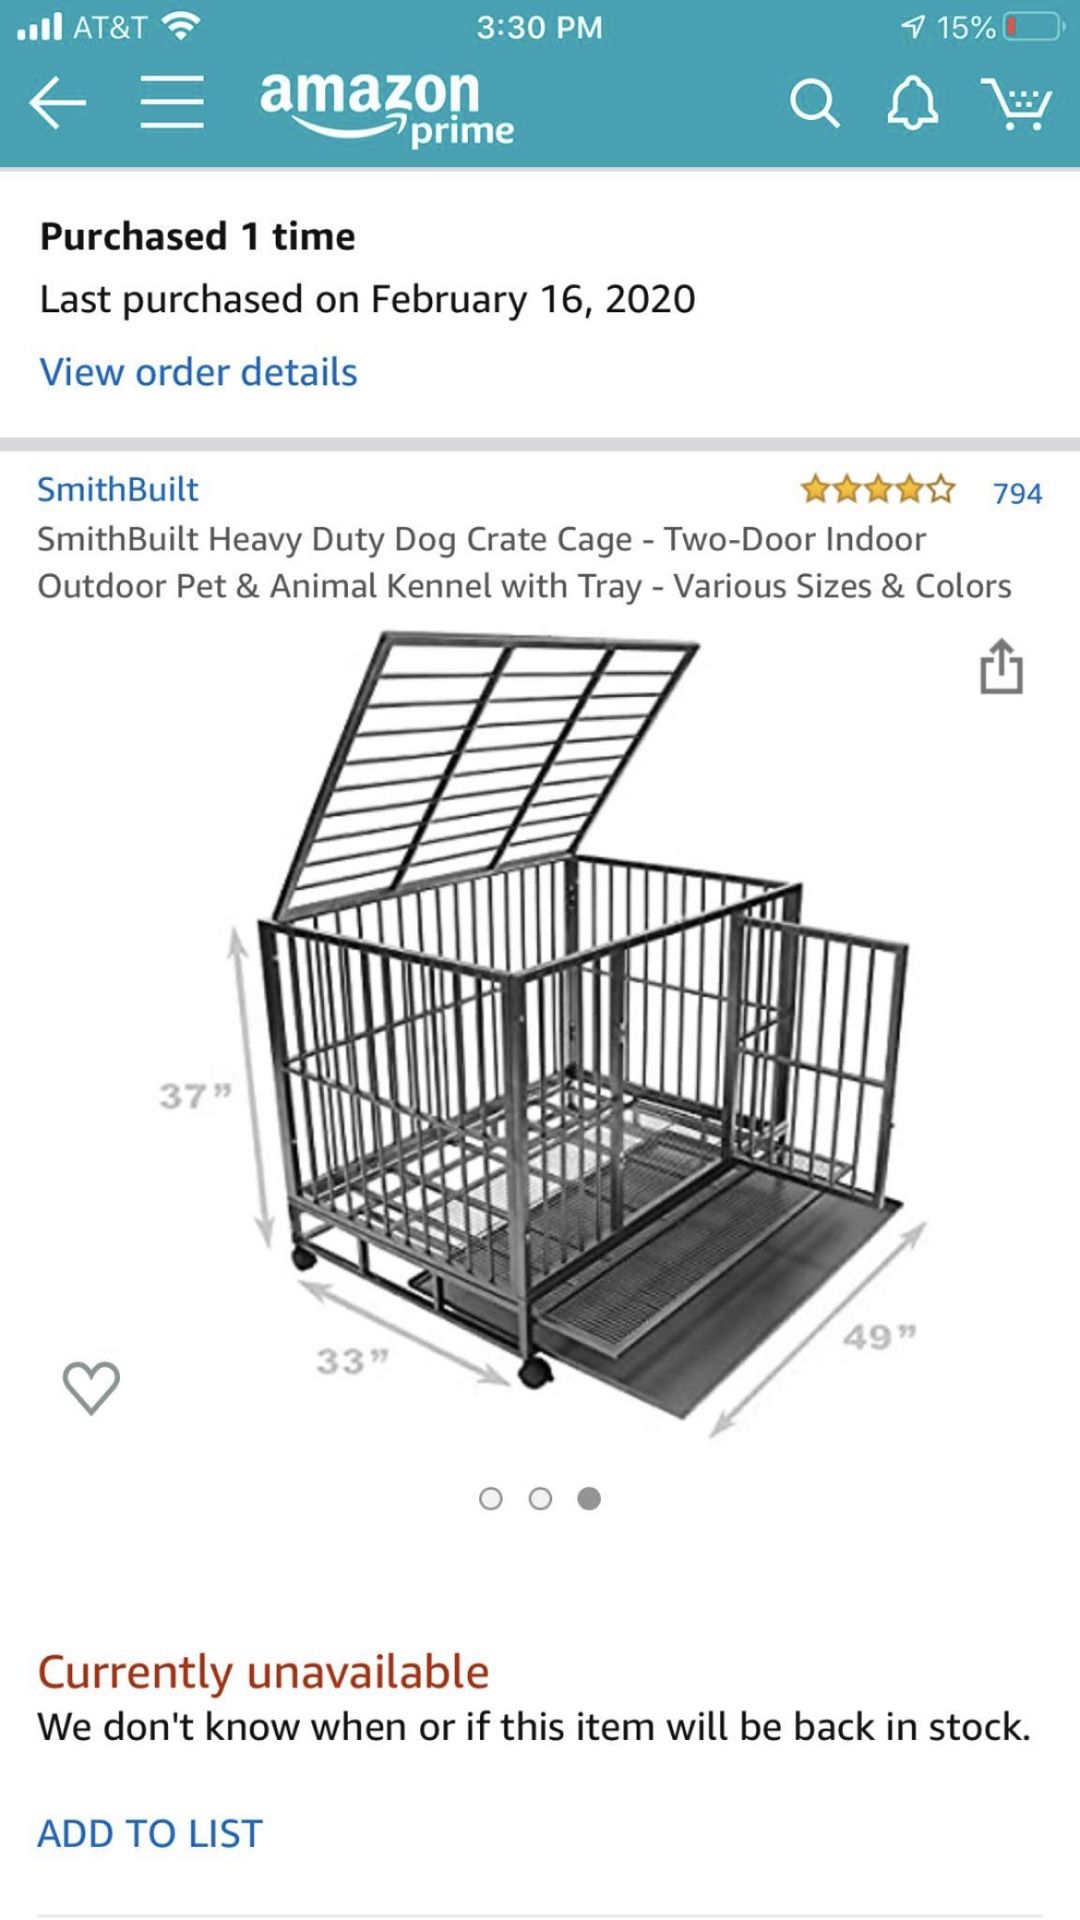 Brand new, large dog crate